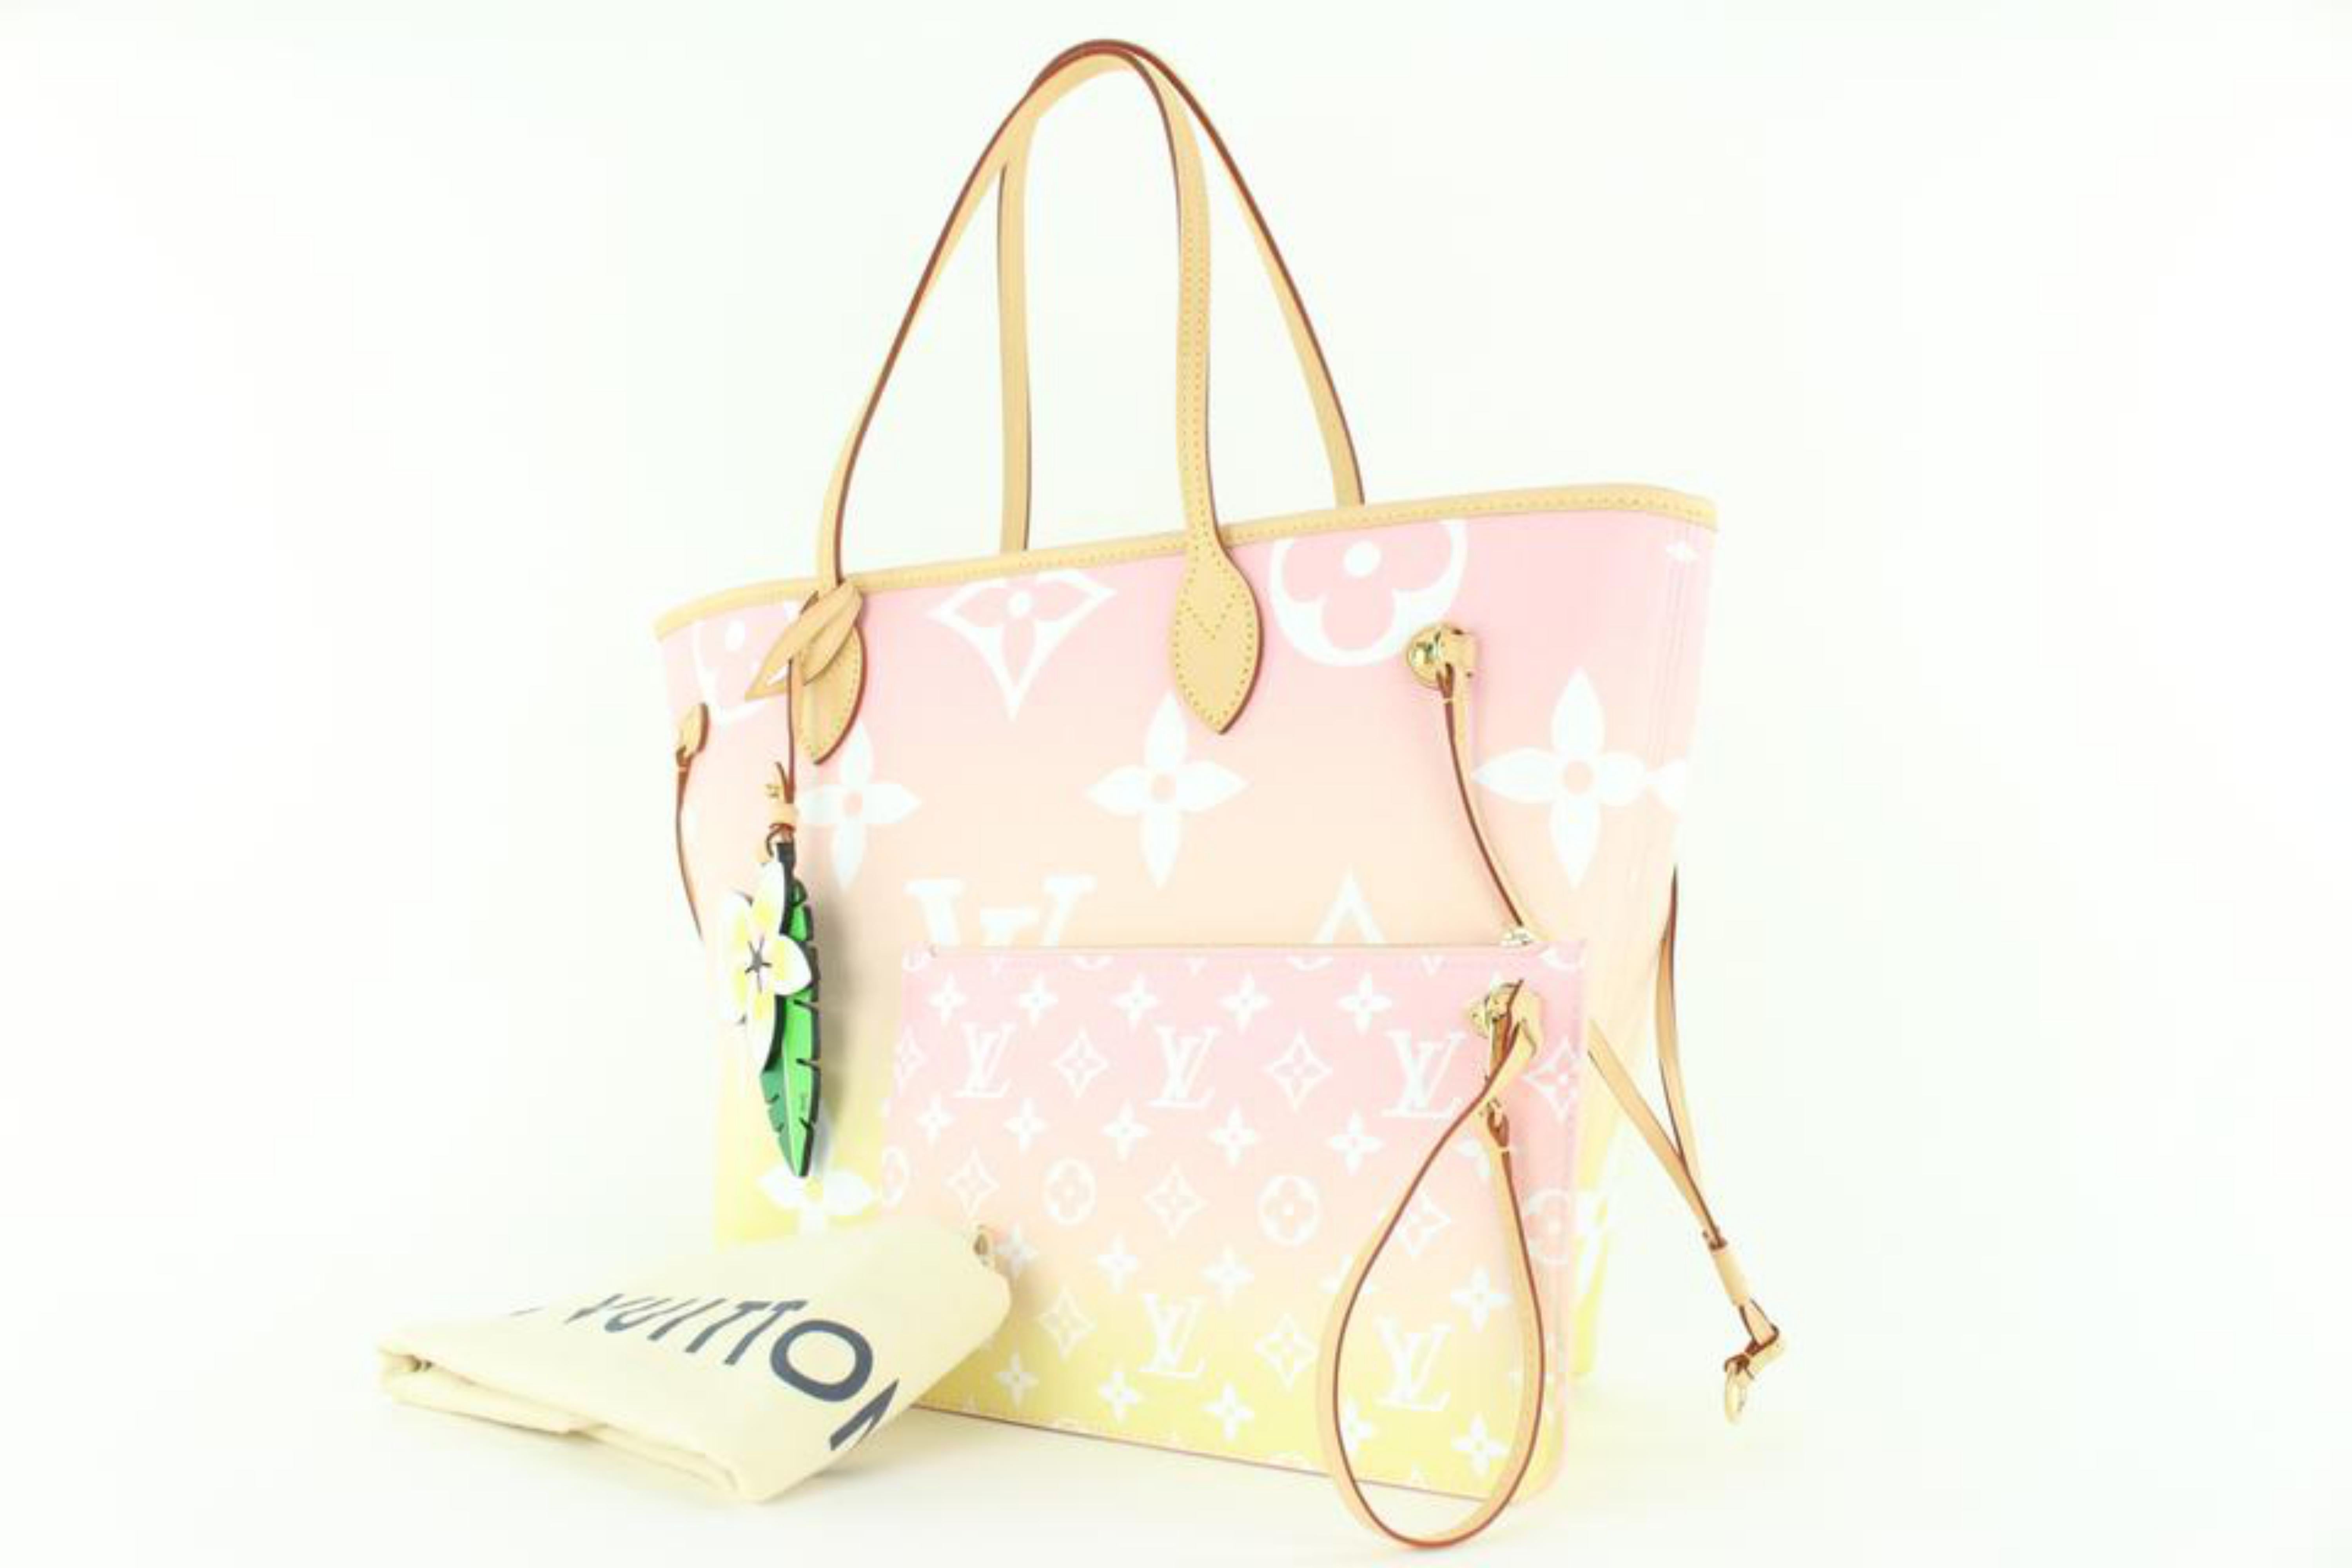 Pink Yellow Monogram By the Pool Neverfull MM with Pouch 4LVJ1021
Date Code/Serial Number: AR0221
Made In: France
Measurements: Length: 16 